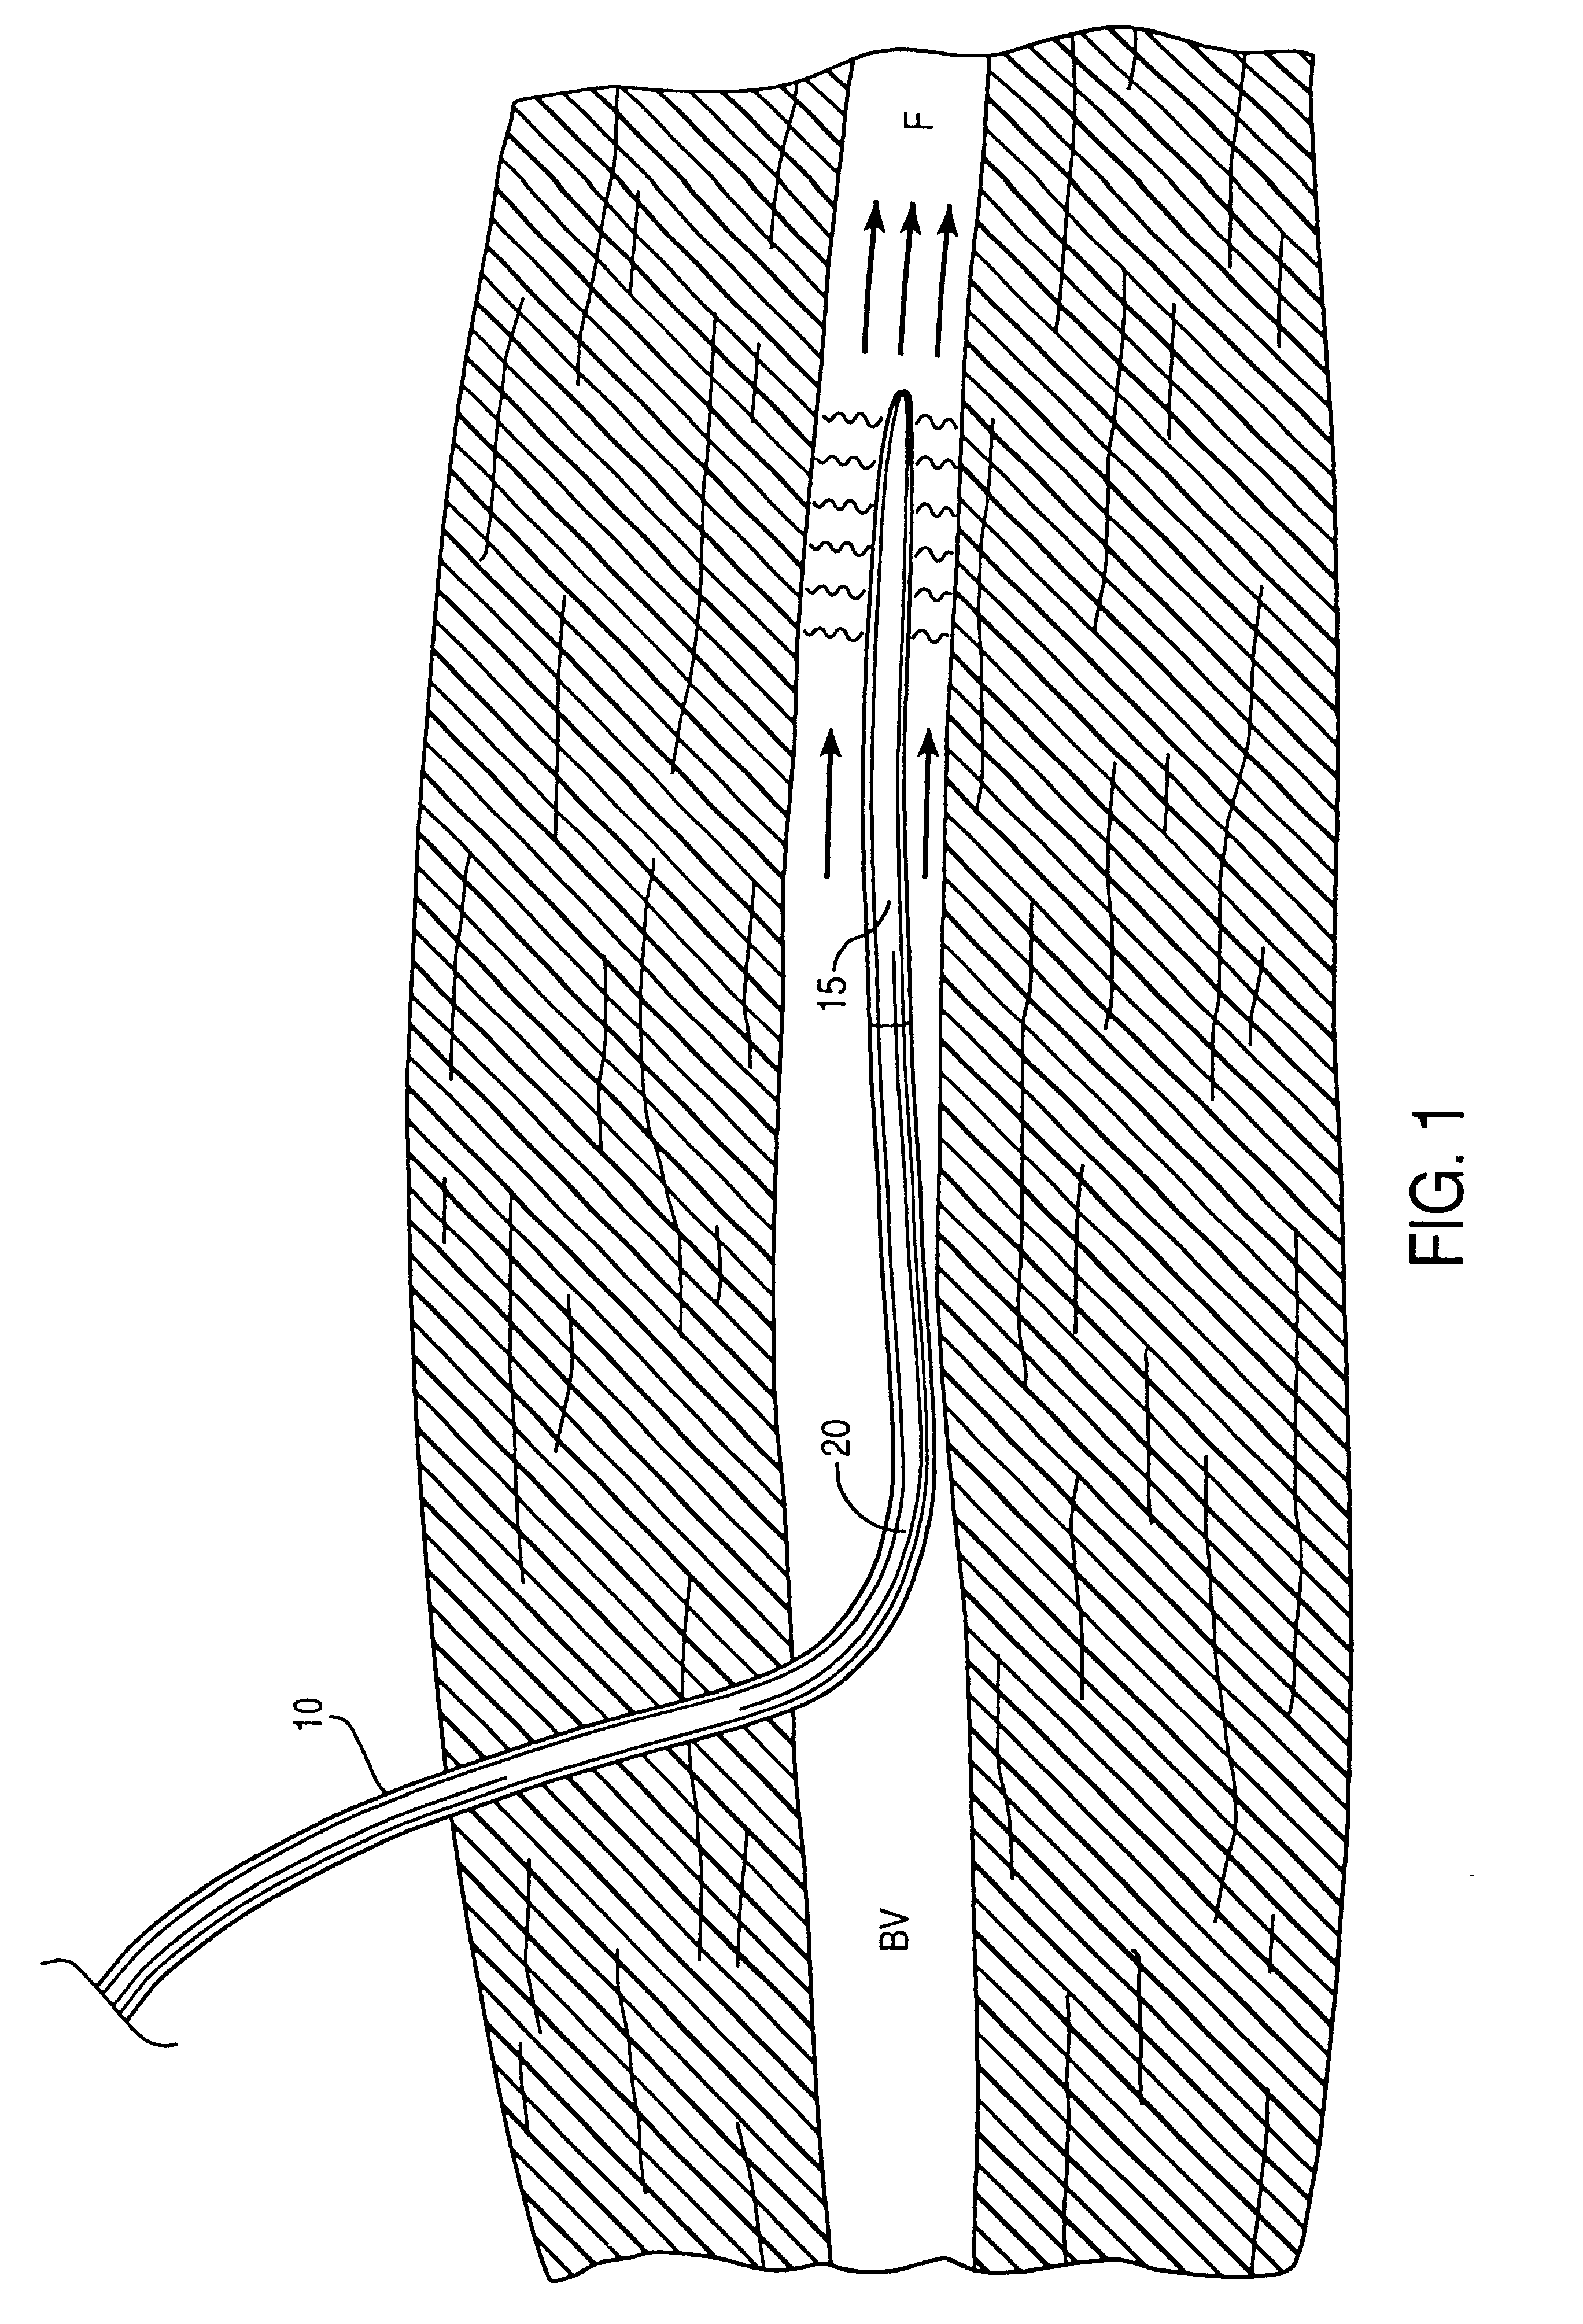 Catheter system for controlling a patient's body temperature by in situ blood temperature modification